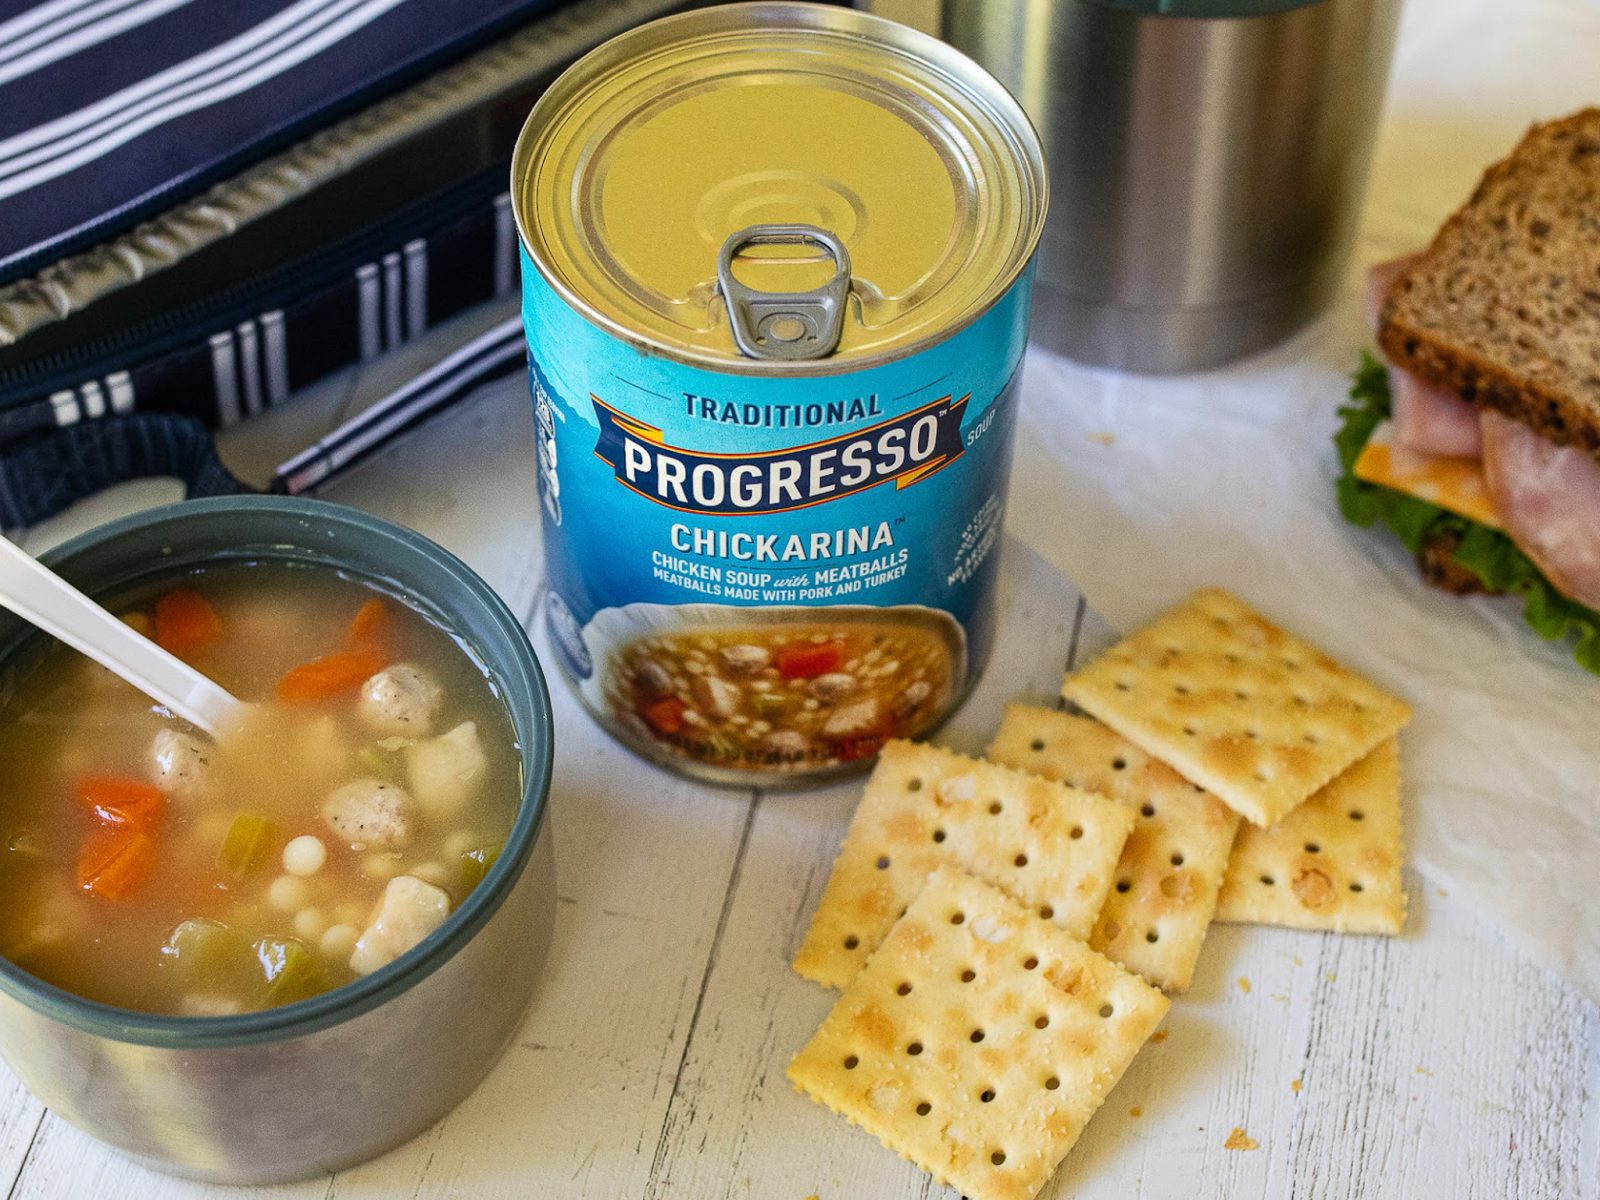 Progresso Soup As Low As $1.29 Per Can At Kroger